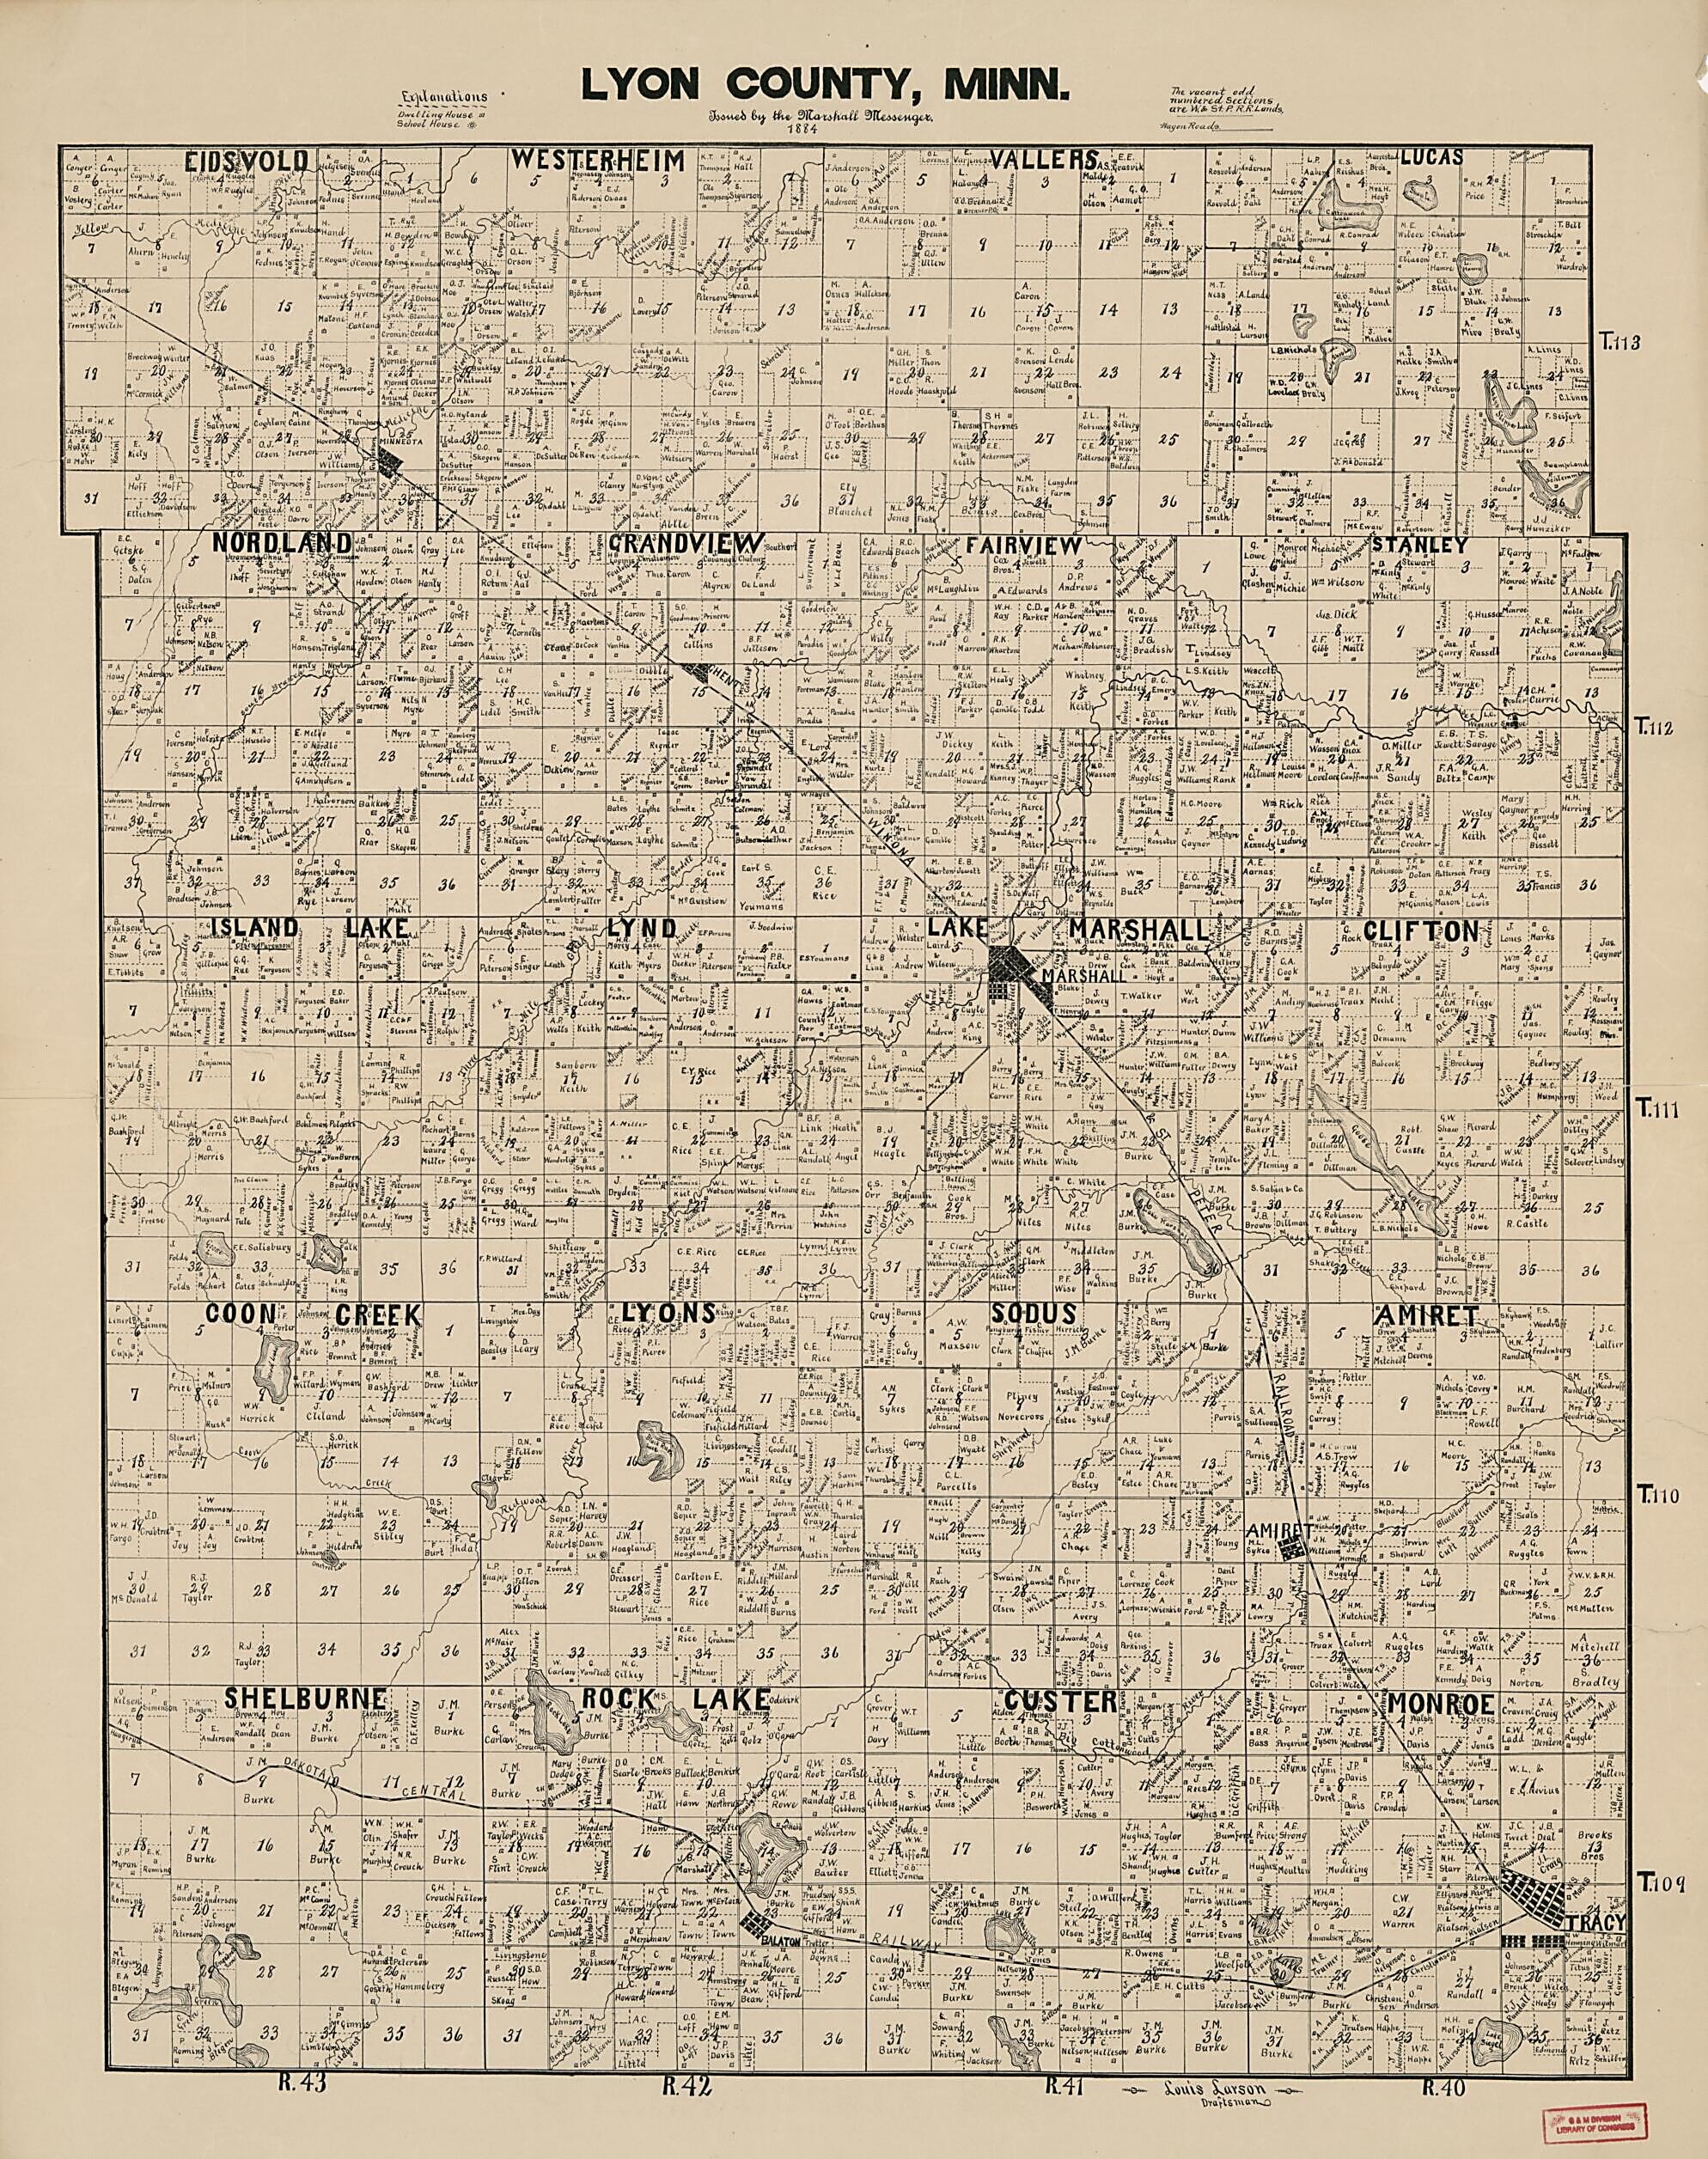 This old map of Lyon County, Minnesota from 1884 was created by Louis Larson in 1884